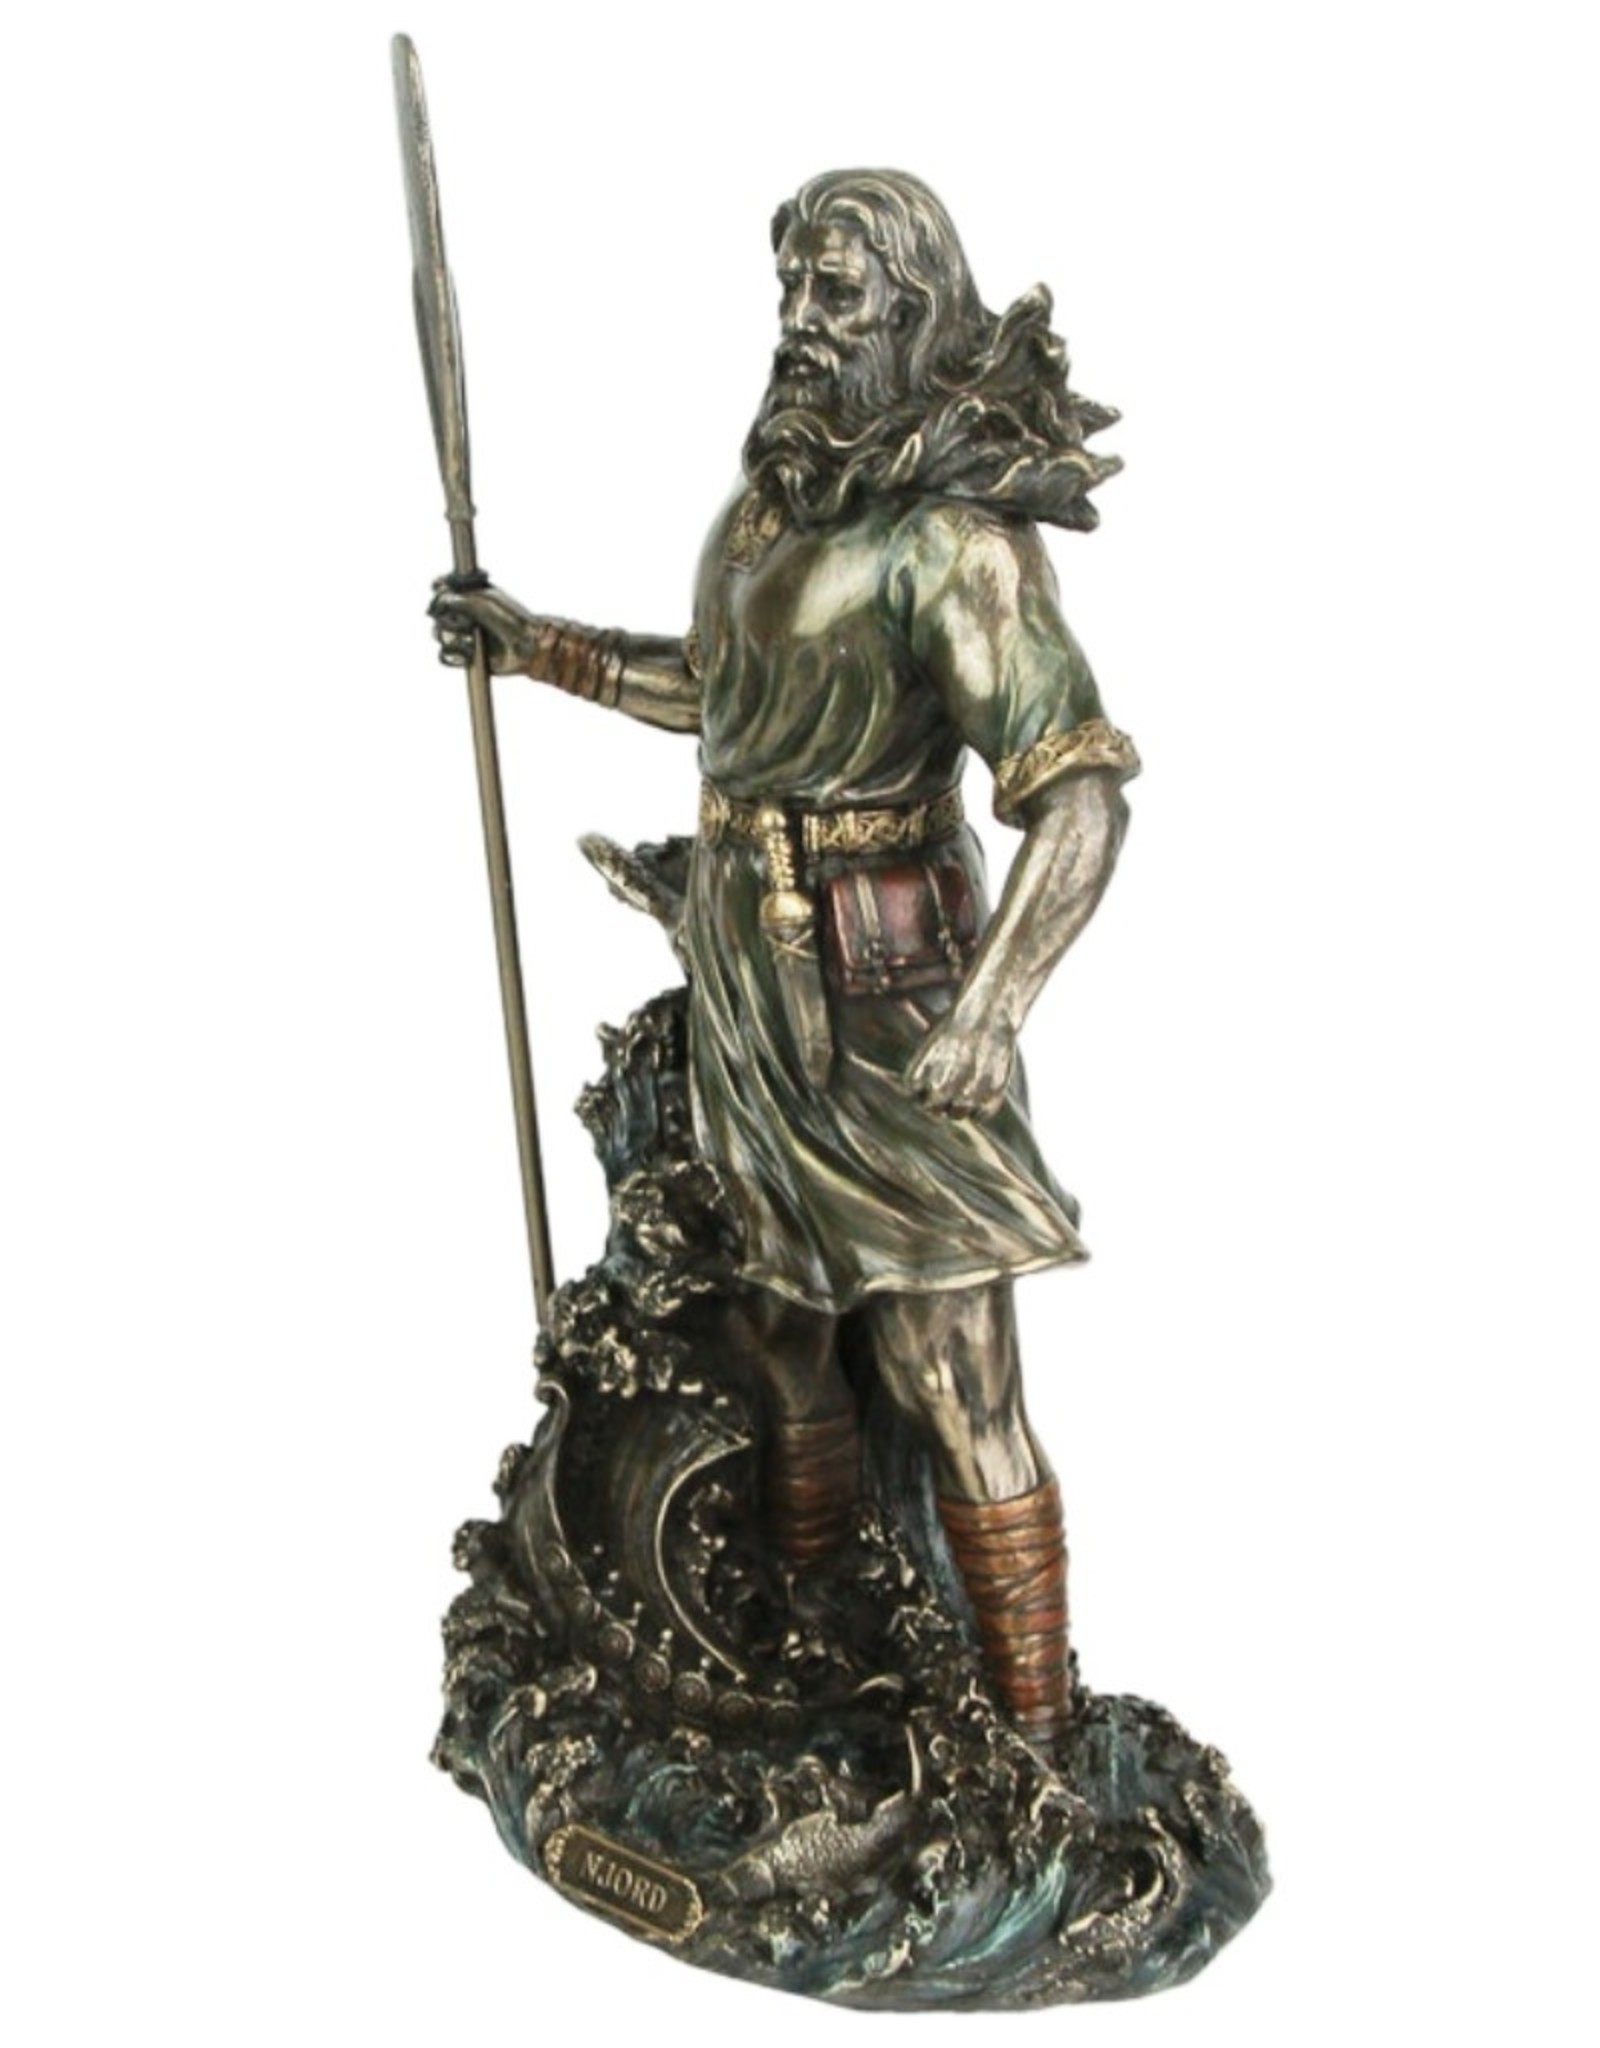 Veronese Design Giftware & Lifestyle - Njord Norse God of Wind and Waters bronzed figurine